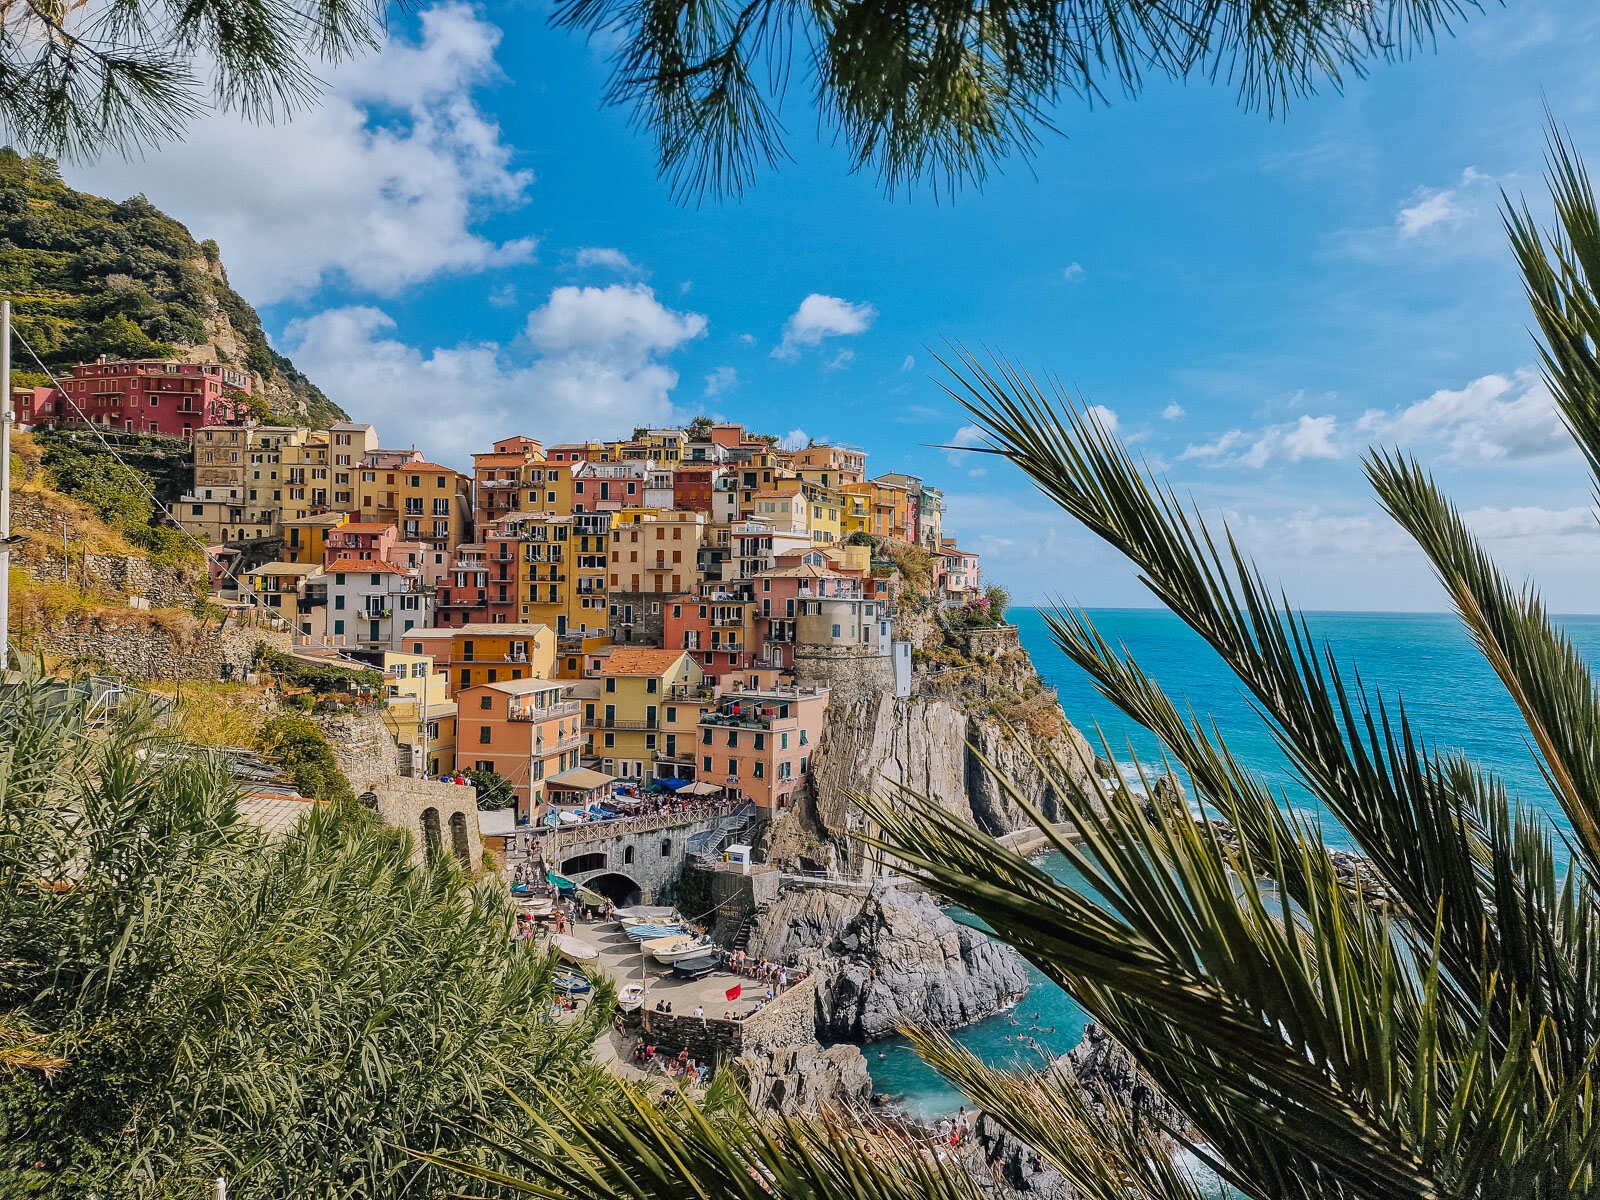 The colourful village of Manarola, Cinque Terre on the sea cliffs with turquoise blue water in the harbour below and framed by trees hanging low over the photo